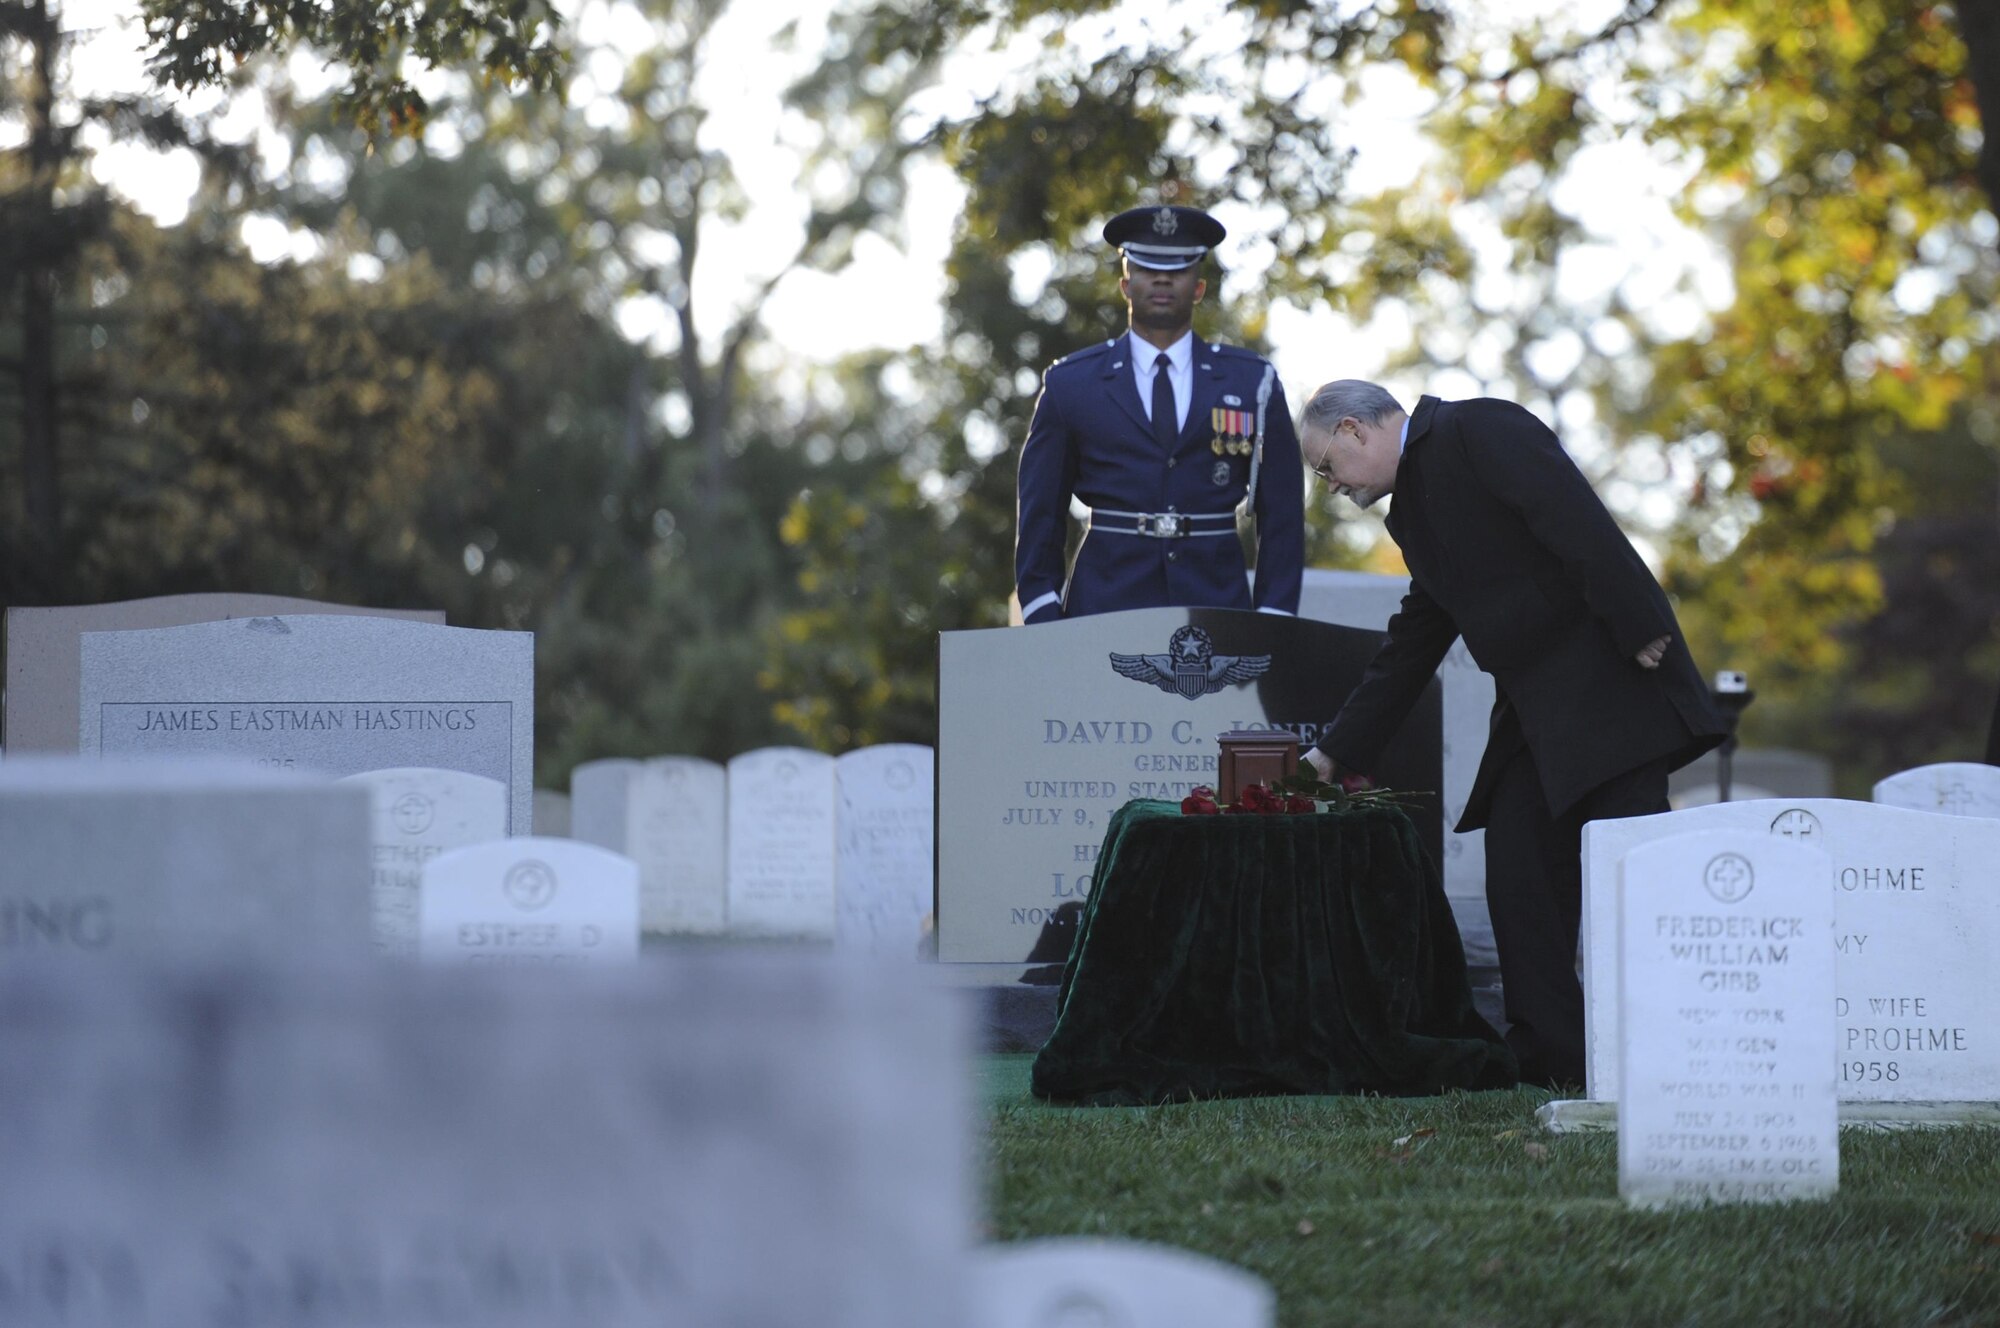 An attendee places a rose over retired Gen. David C. Jones burial site after his funeral Oct. 25, 2013, at Arlington National Cemetery, Va. Jones served four years as Air Force chief of staff from 1974 to 1978 until he was appointed as chairman of the Joint Chiefs of Staff. As chairman he served as the senior military adviser to the president, helping set in motion a sweeping reorganization of the nation’s military command. Jones died Aug. 10, 2013 at the age of 92. 